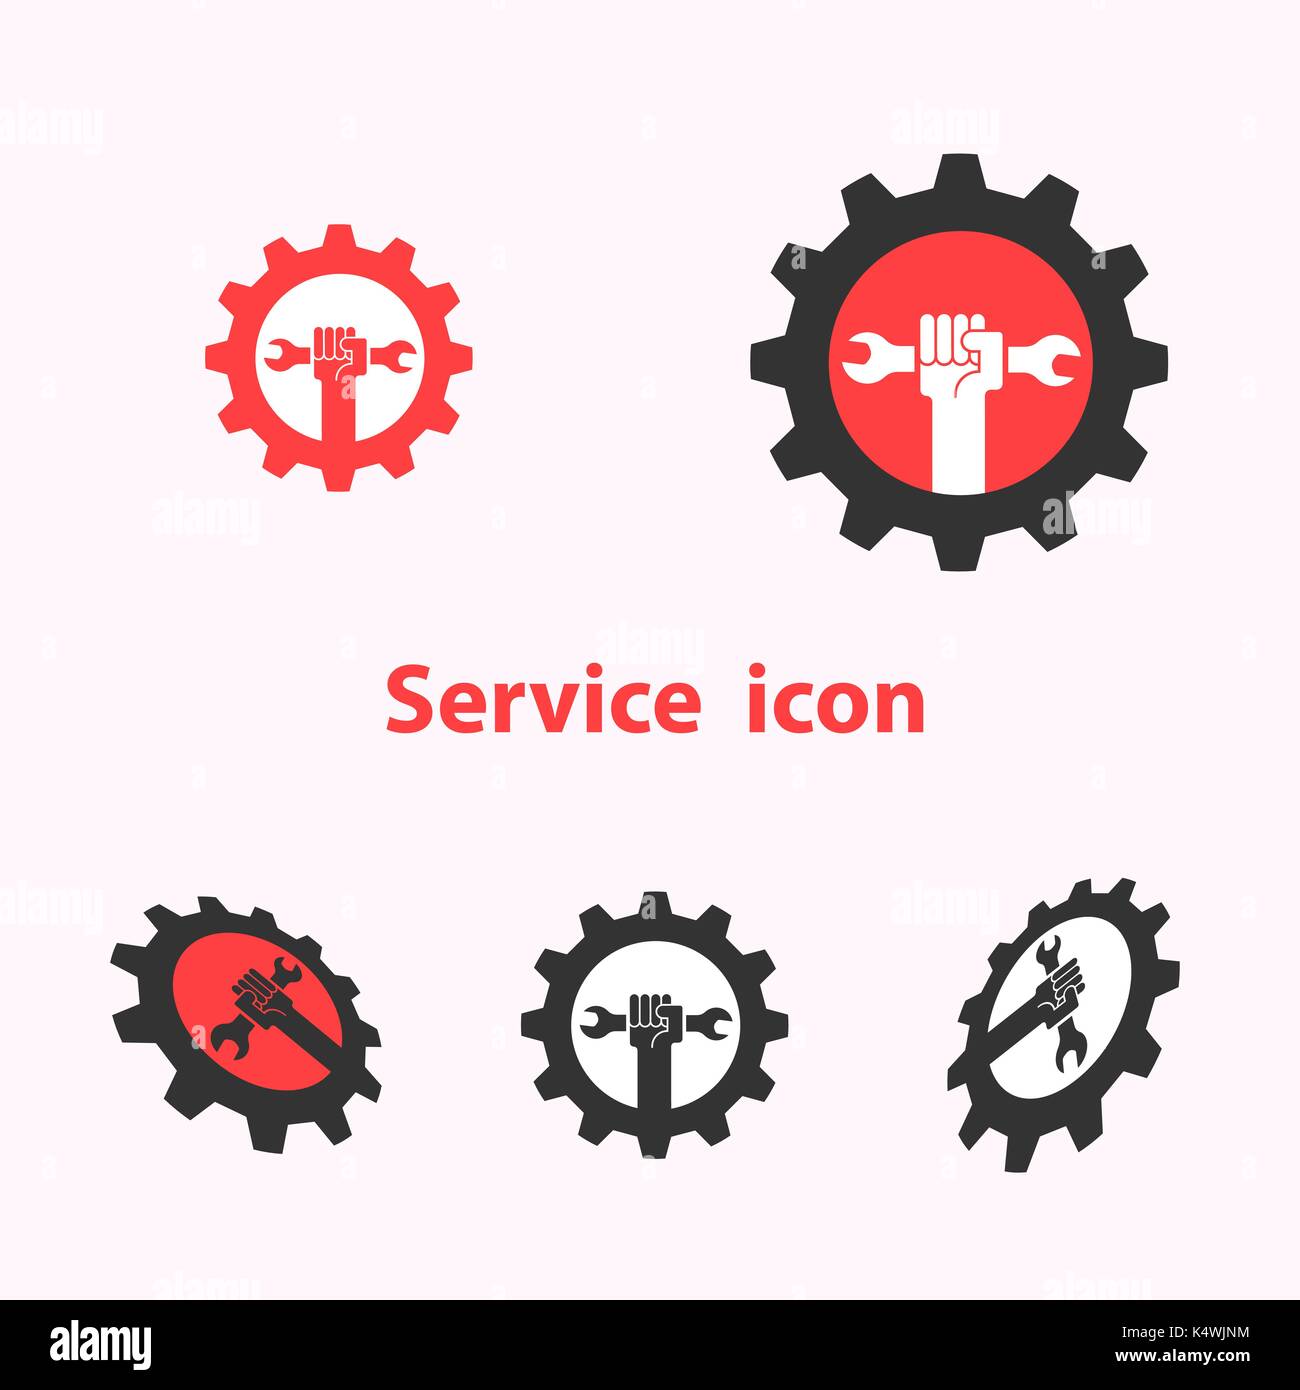 Human hand icon and wrench with gear vector logo design template. Repair and Service tool icon.Maintenance and Technical support concept.Vector illust Stock Vector